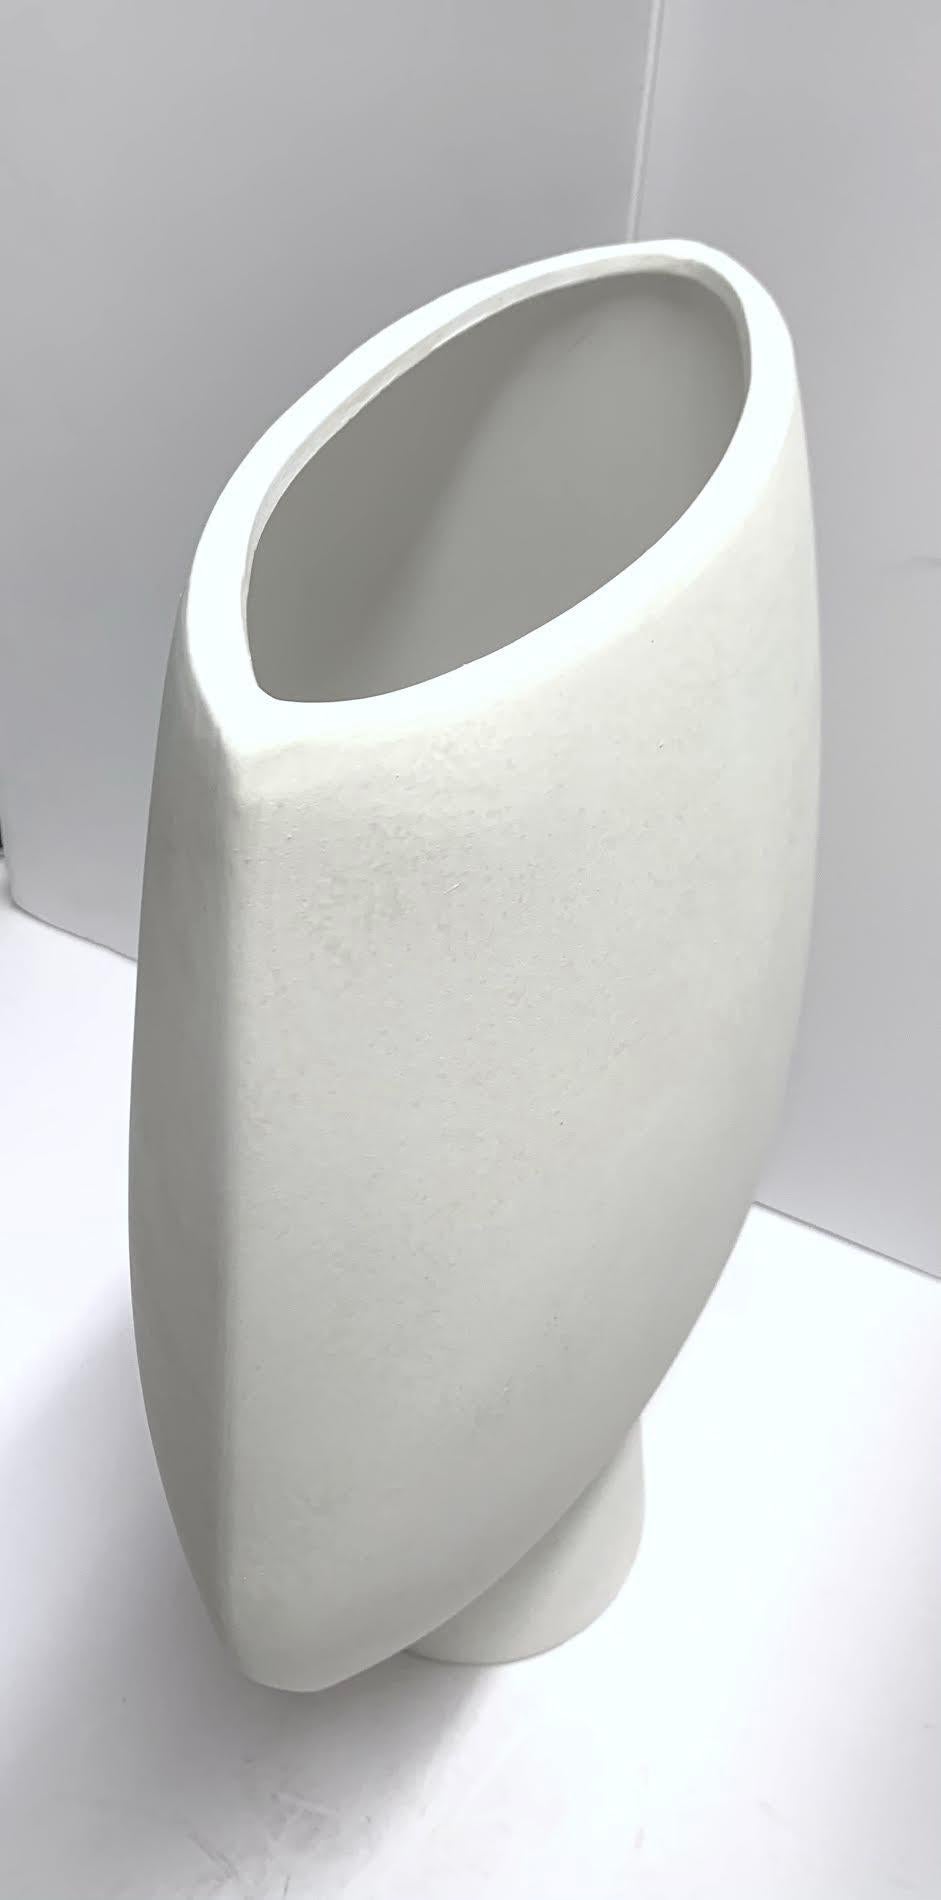 Contemporary Danish designed large arrow shaped vase.
White in color.
Part of a large collection of Danish design vases.